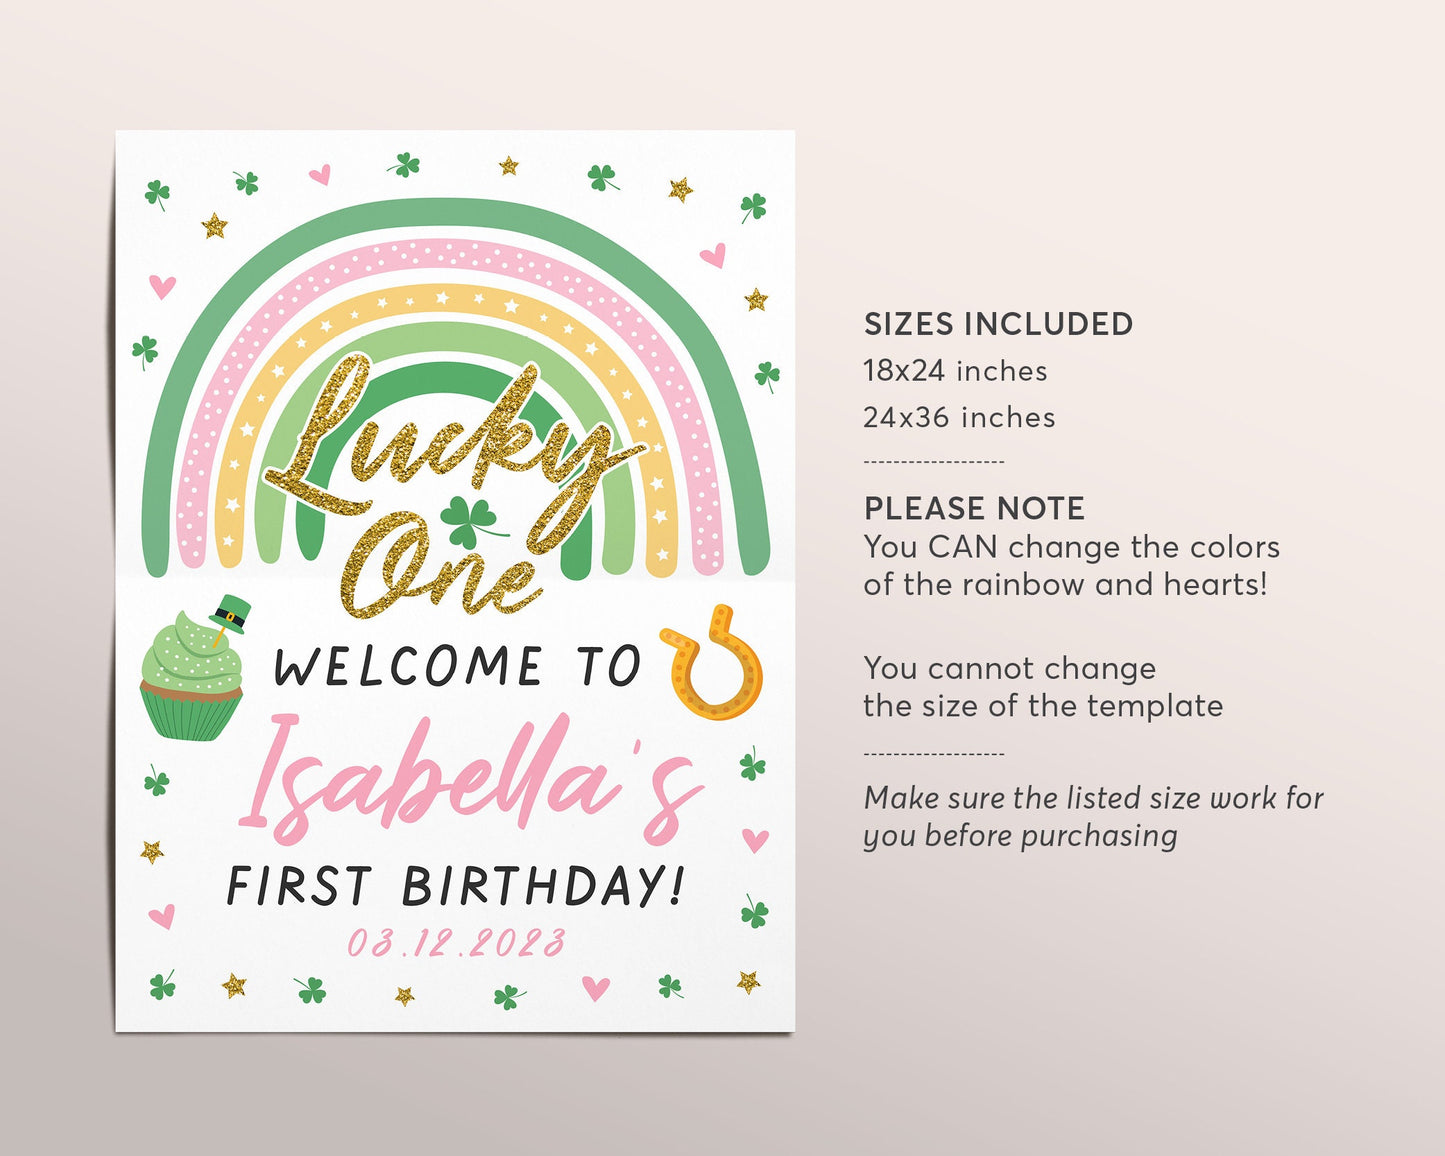 St Patricks Day Birthday Party Welcome Sign Editable Template, Girl First Birthday Poster Decor Printable, Rainbow Shamrock, St Pattys Day